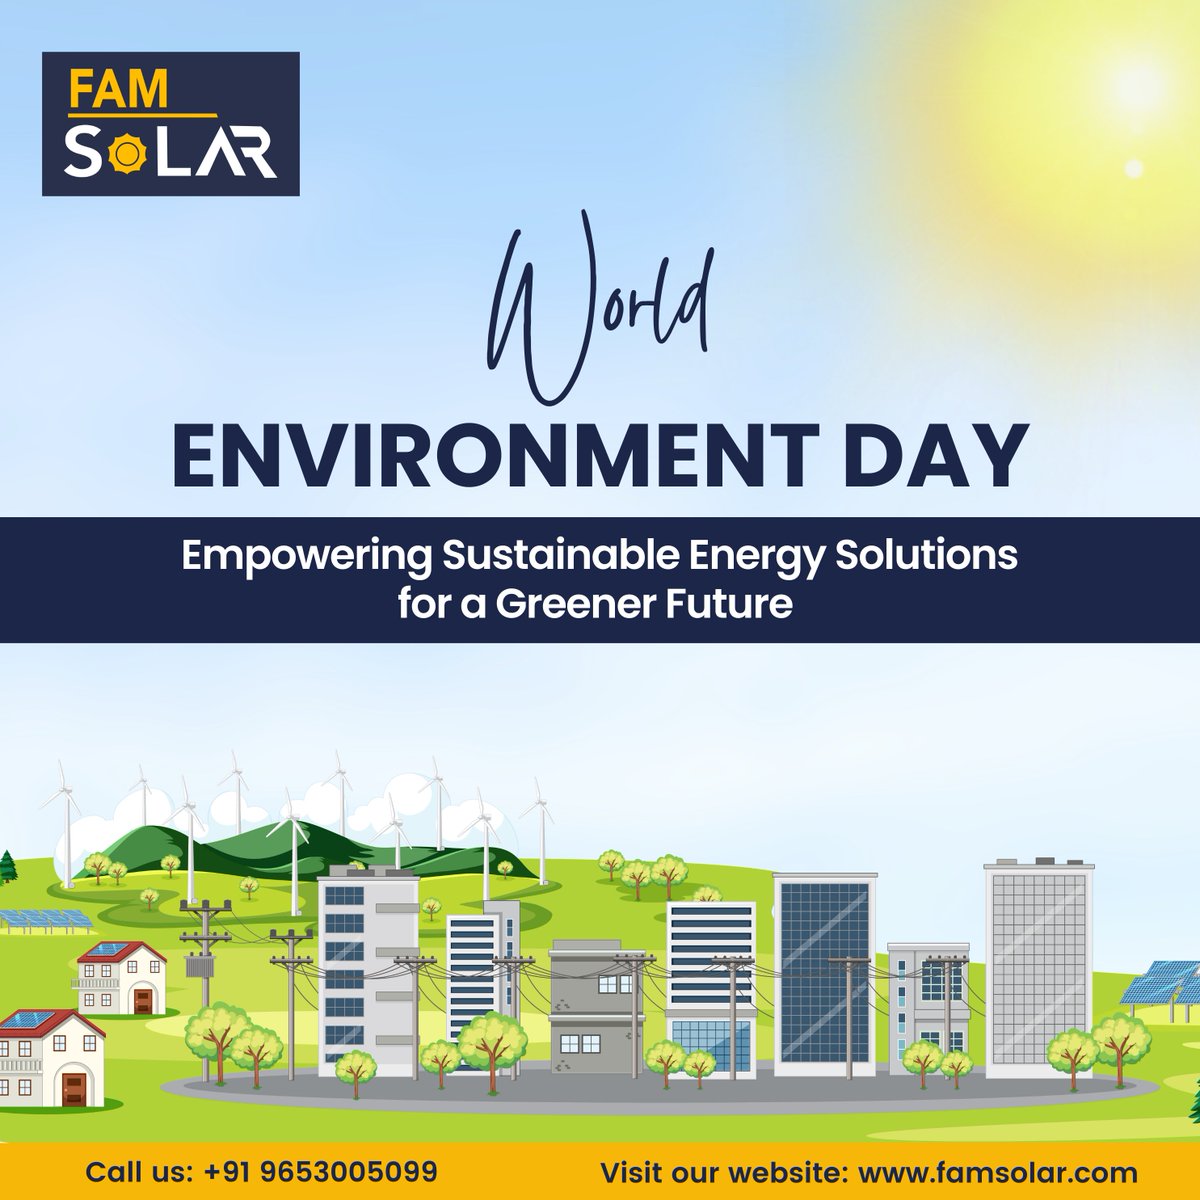 'Empowering Sustainable Energy Solutions for a Greener Future - Celebrate World Environment Day with Famsolar!

Get In Touch To Know More
Visit Our Website: famsolar.com
Contact us for any queries: +91 9653005099

#SustainableEnergySolutions #GreenerFuture